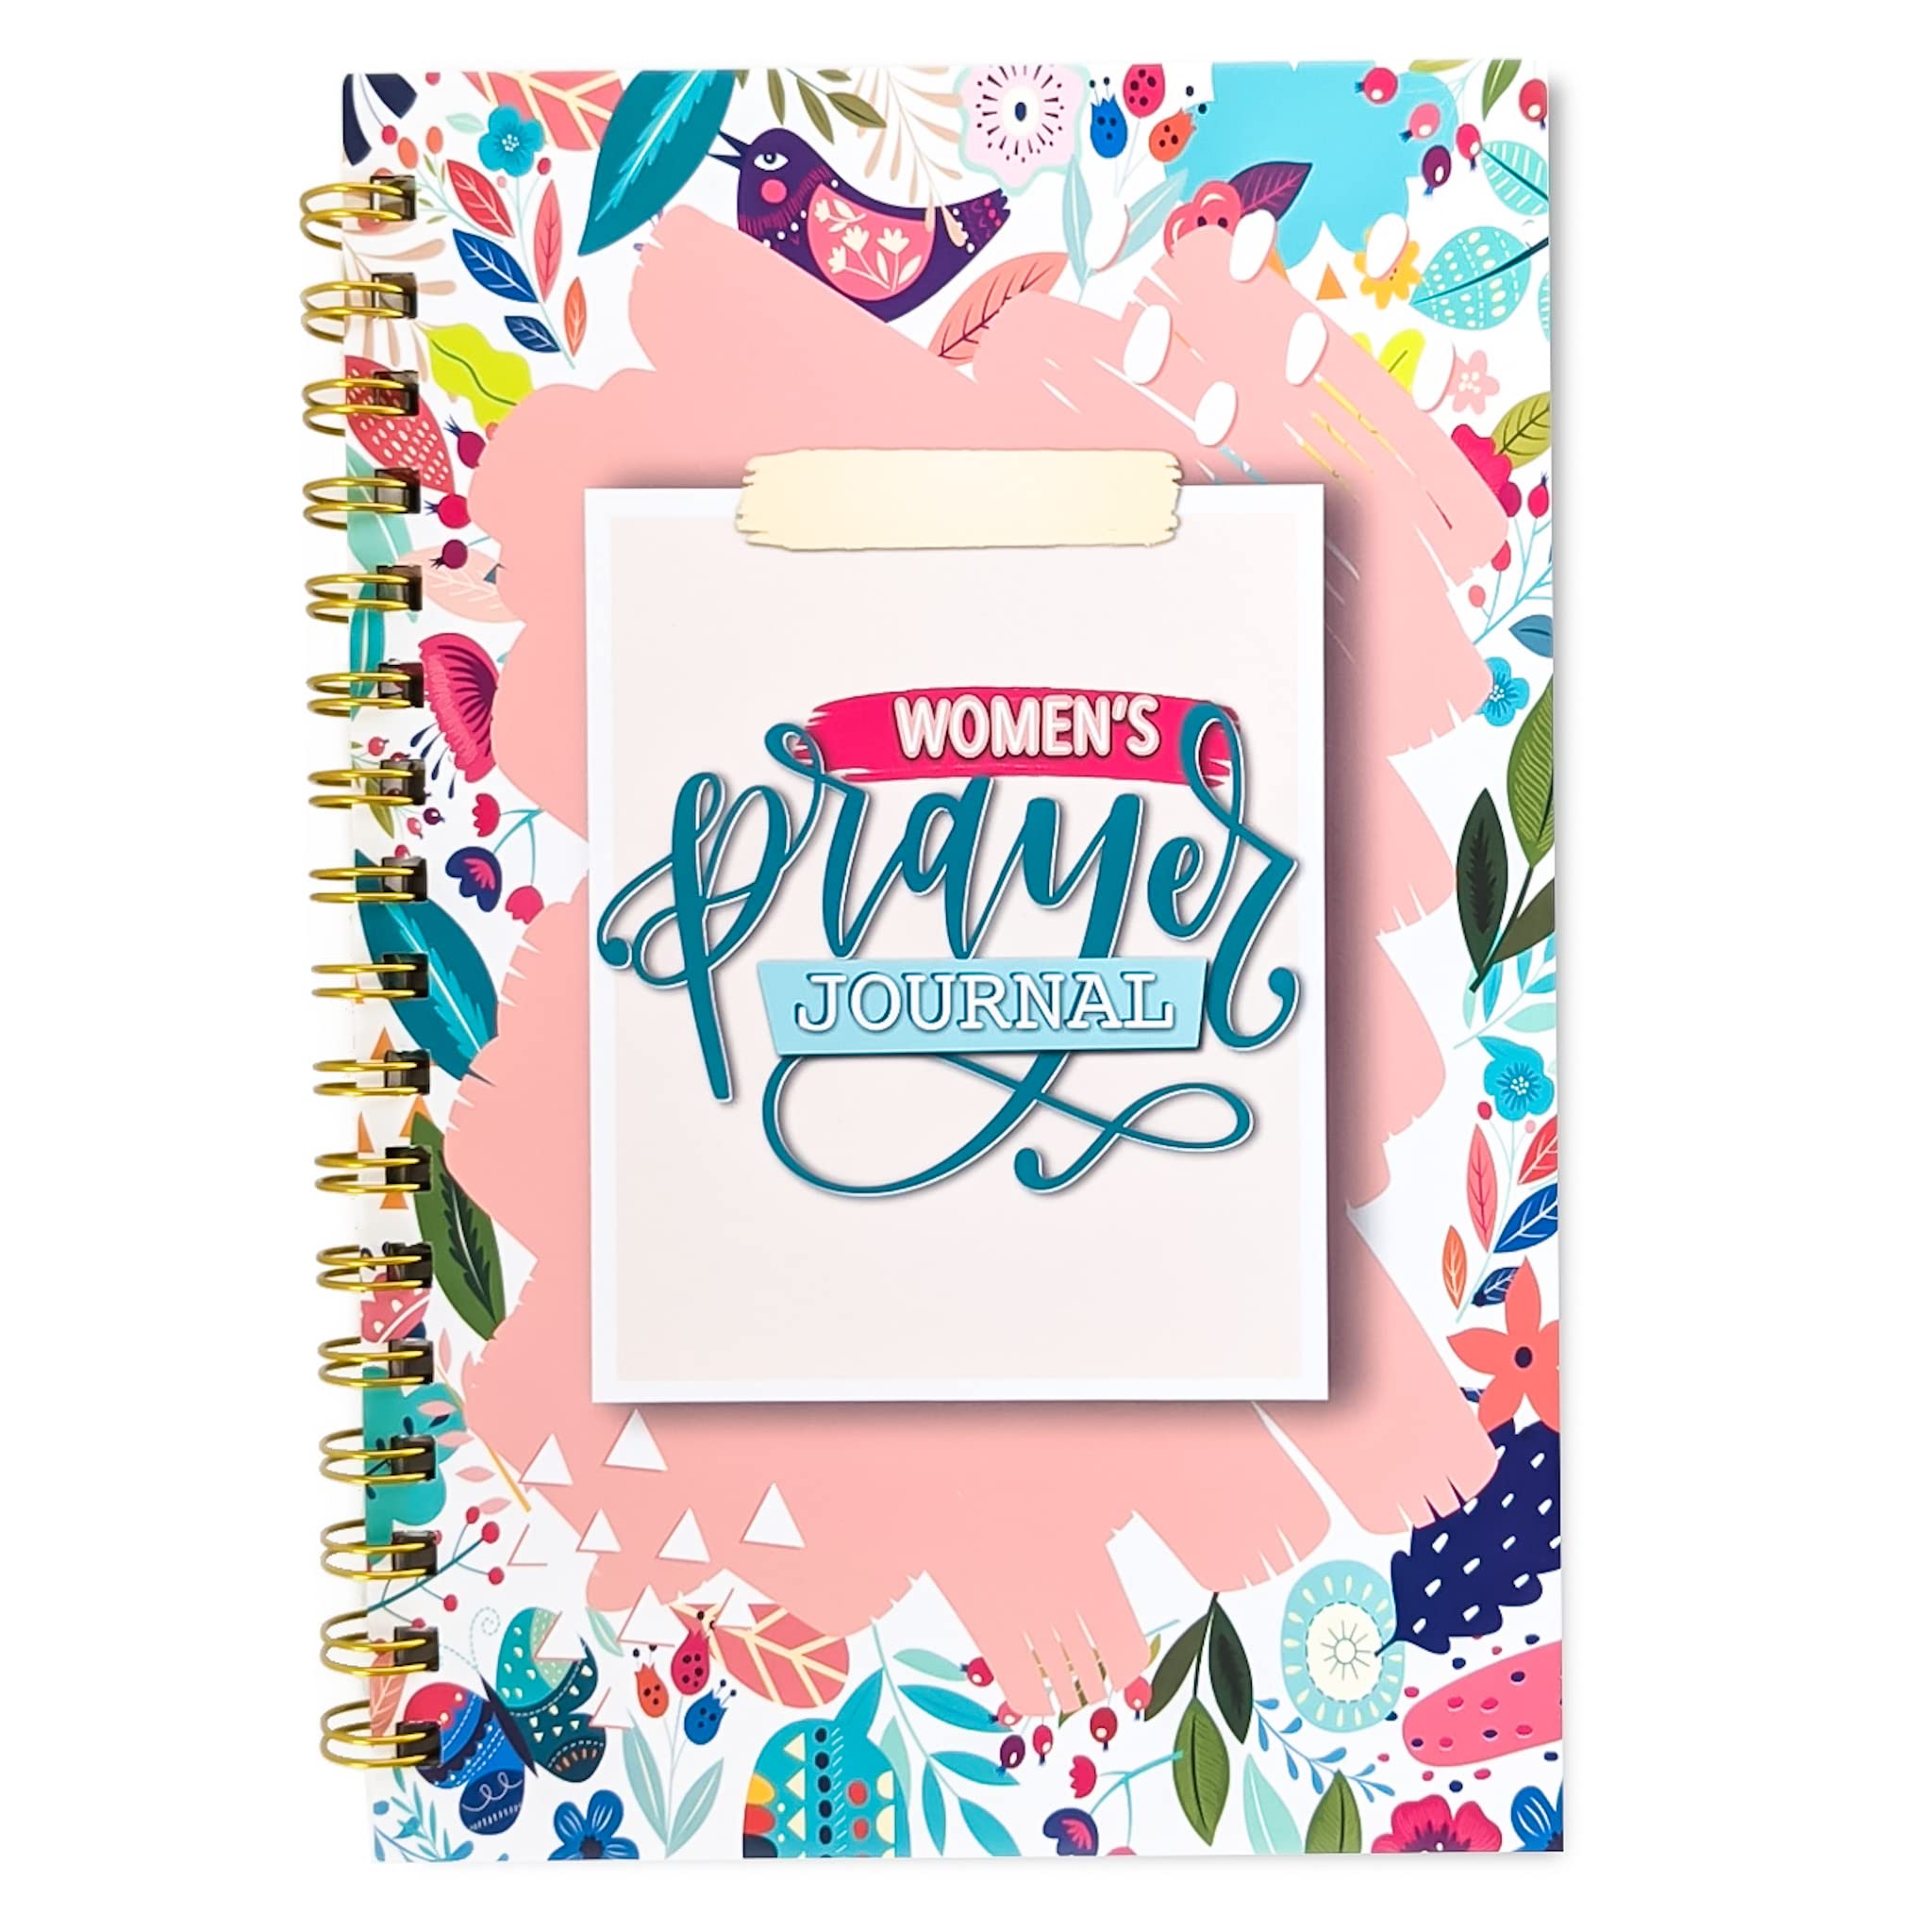 Women's Prayer Journal: A Christian Devotional for a Year of Praise, Gratitude, and Reflection